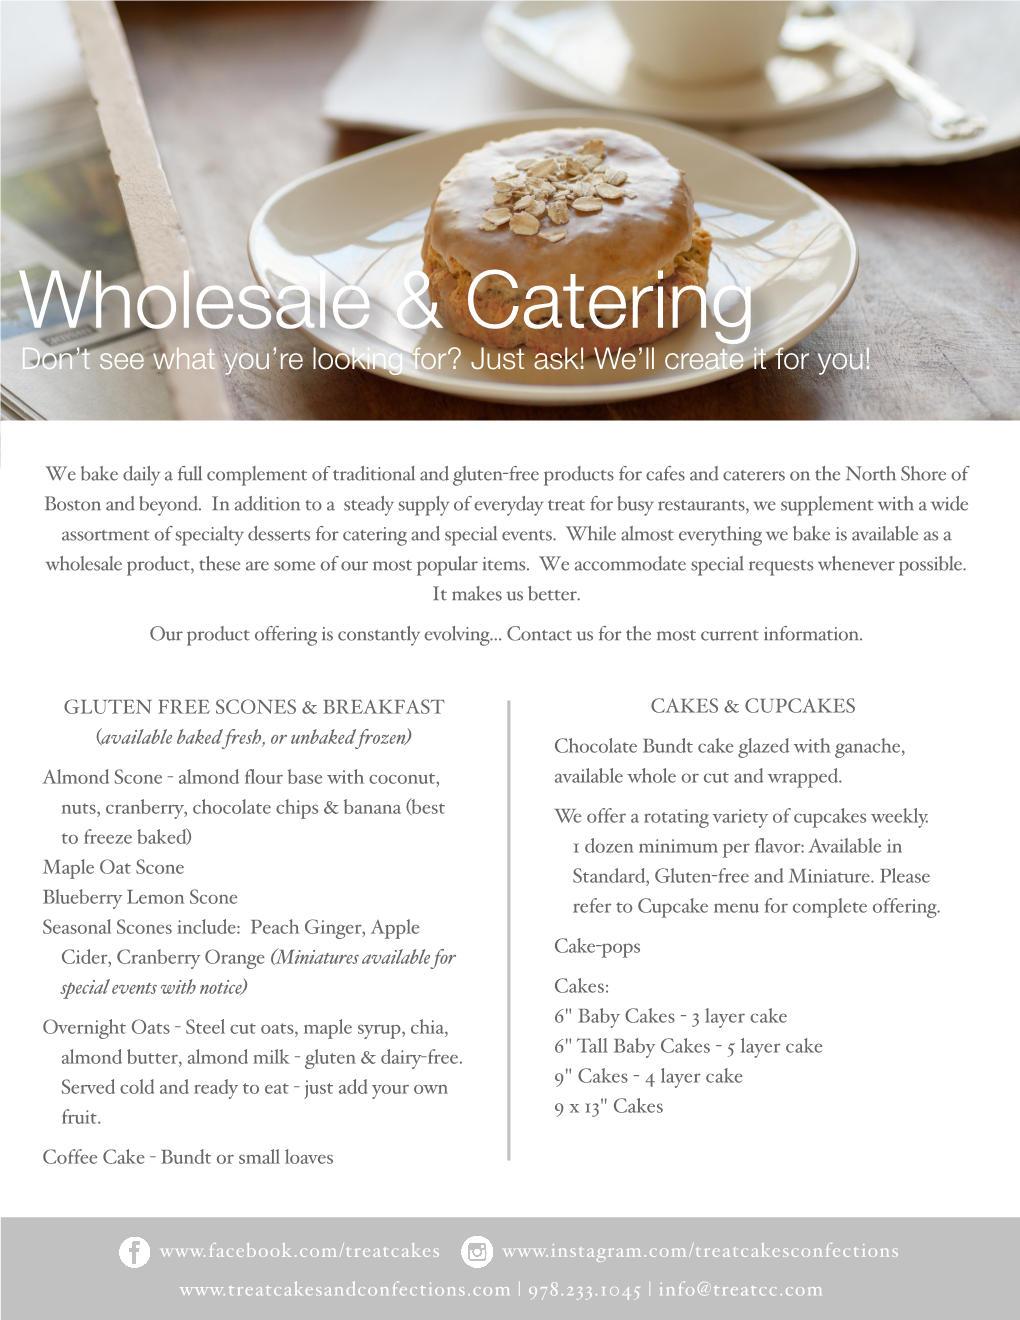 Wholesale & Catering P1